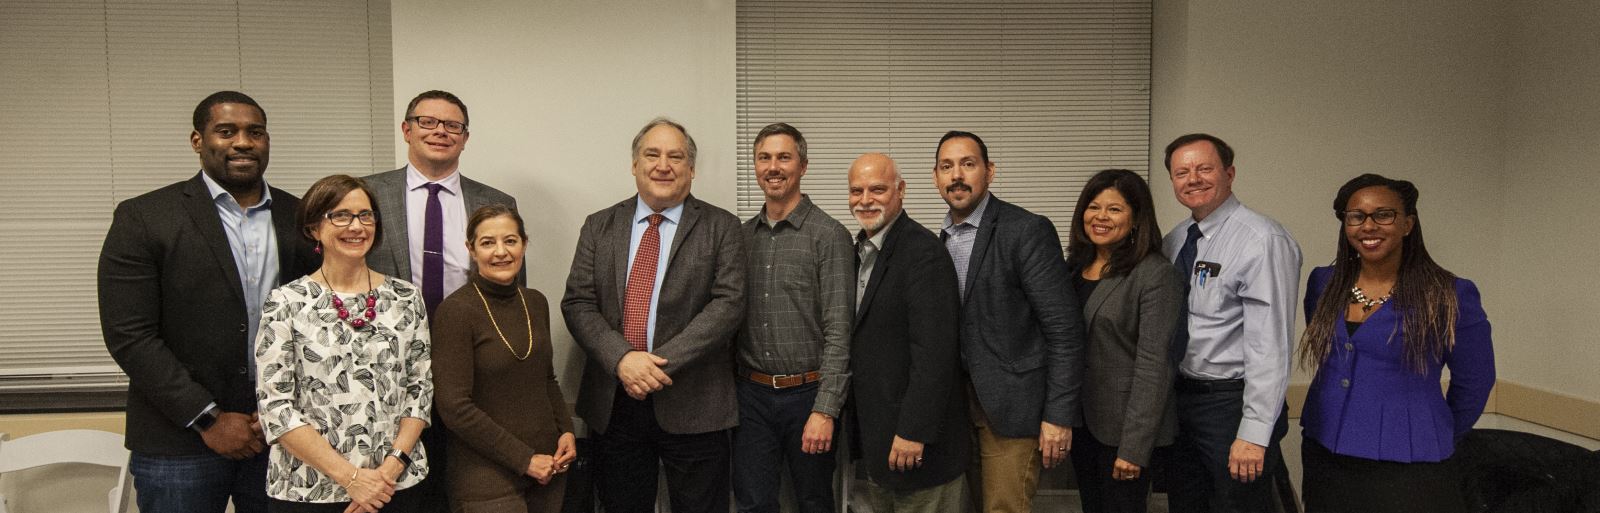 County Executive Marc Elrich joined the Wheaton Urban District Advisory Committee for a discussion at the January 8, 2019 Committee Meeting. Those pictured here include Members: Ron Franks, Leah Haygood, Stuart Amos, Mariela Garcia-Colberg, County Executive Marc Elrich, Chair William Jelen, Members: Jim Epstein, Omar Lazo, Mirza Donegan, William Moore, and Vice Chair Chelsea Johnson.